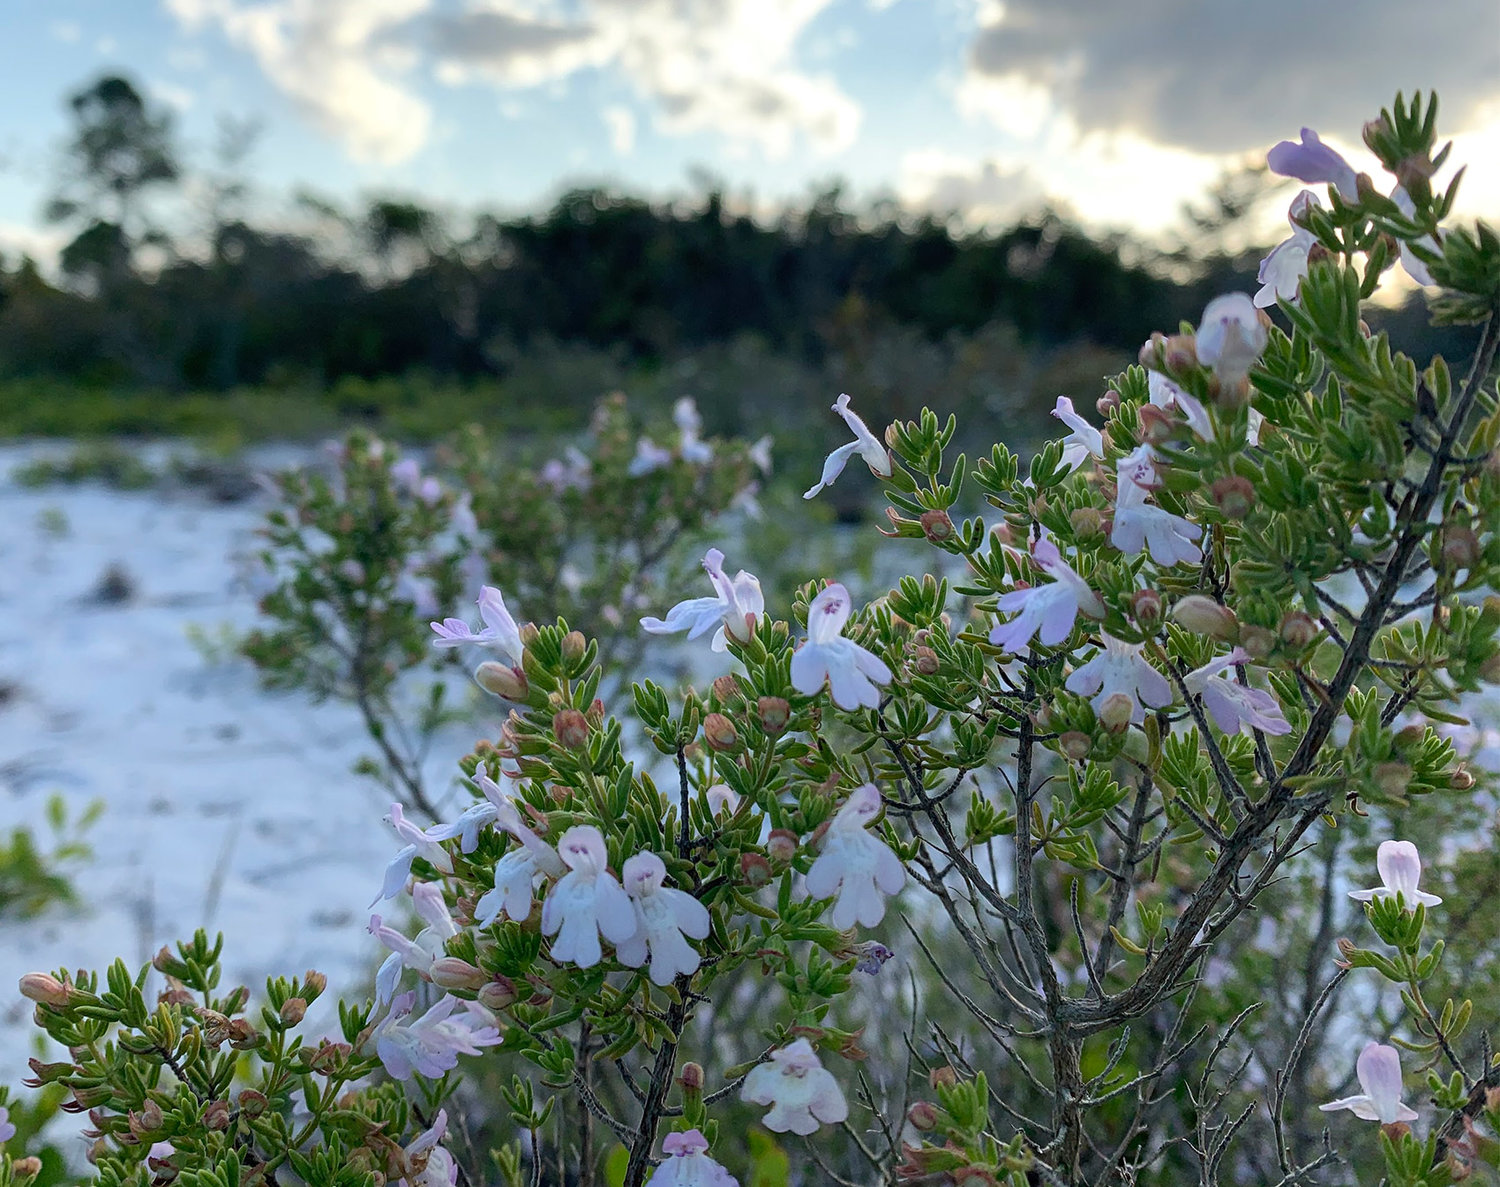 Ashe’s calamint, a threatened plant in Florida, may depend on the blue calamintha bee for pollination, Daniels said.